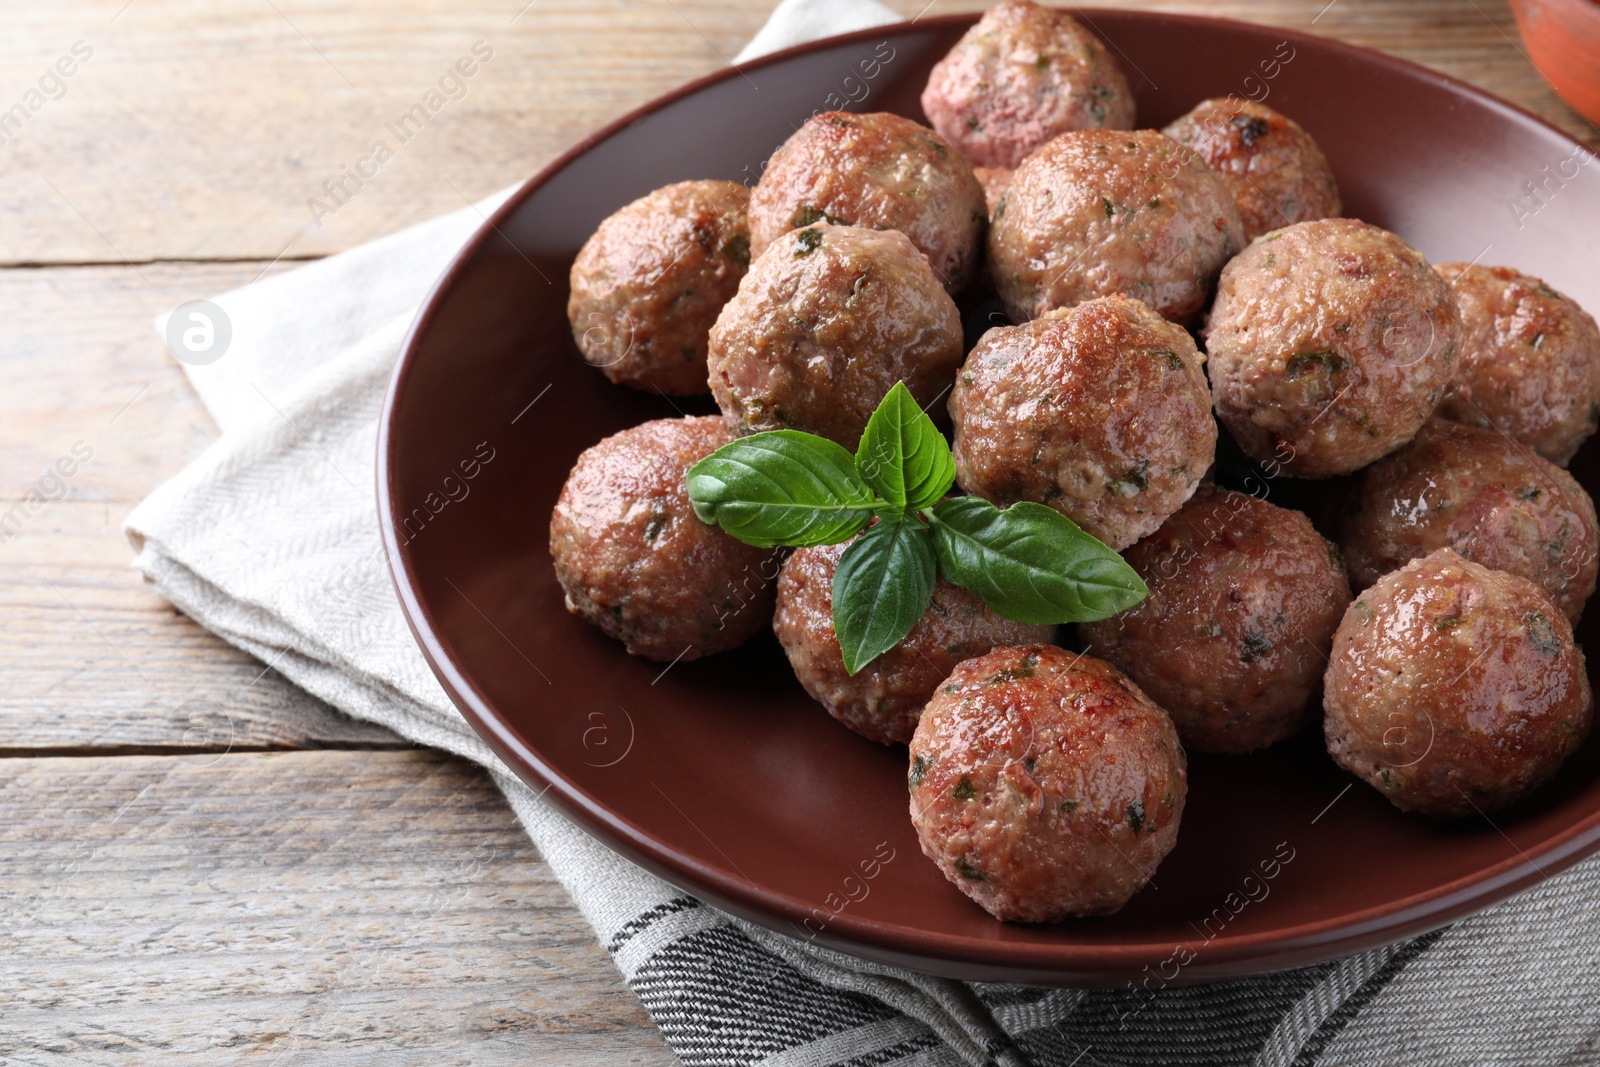 Photo of Tasty cooked meatballs with basil served on wooden table